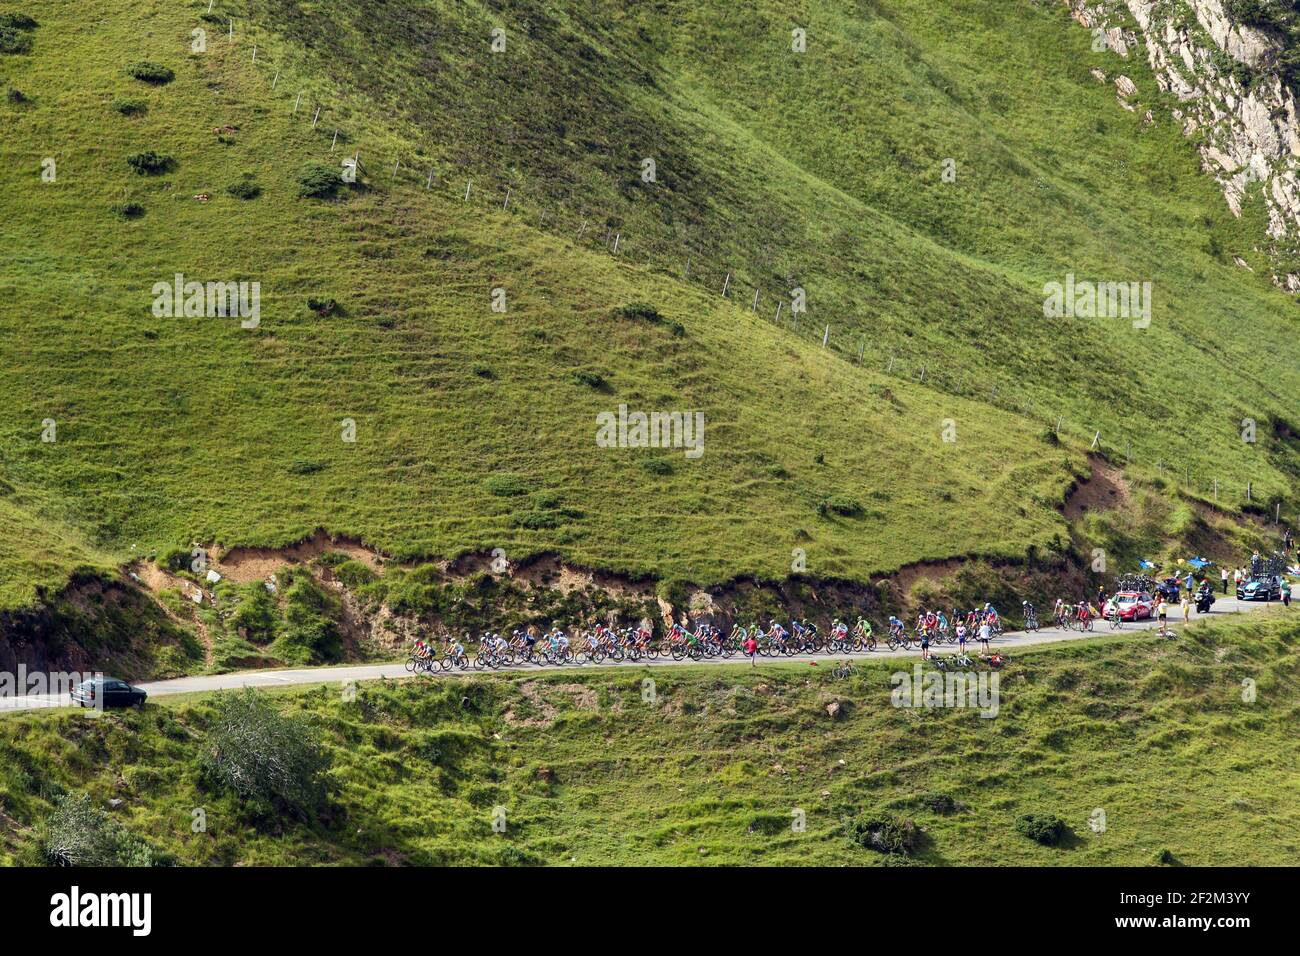 Riders are pictured in the Port de Bales during the Tour of France, UCI  World Tour